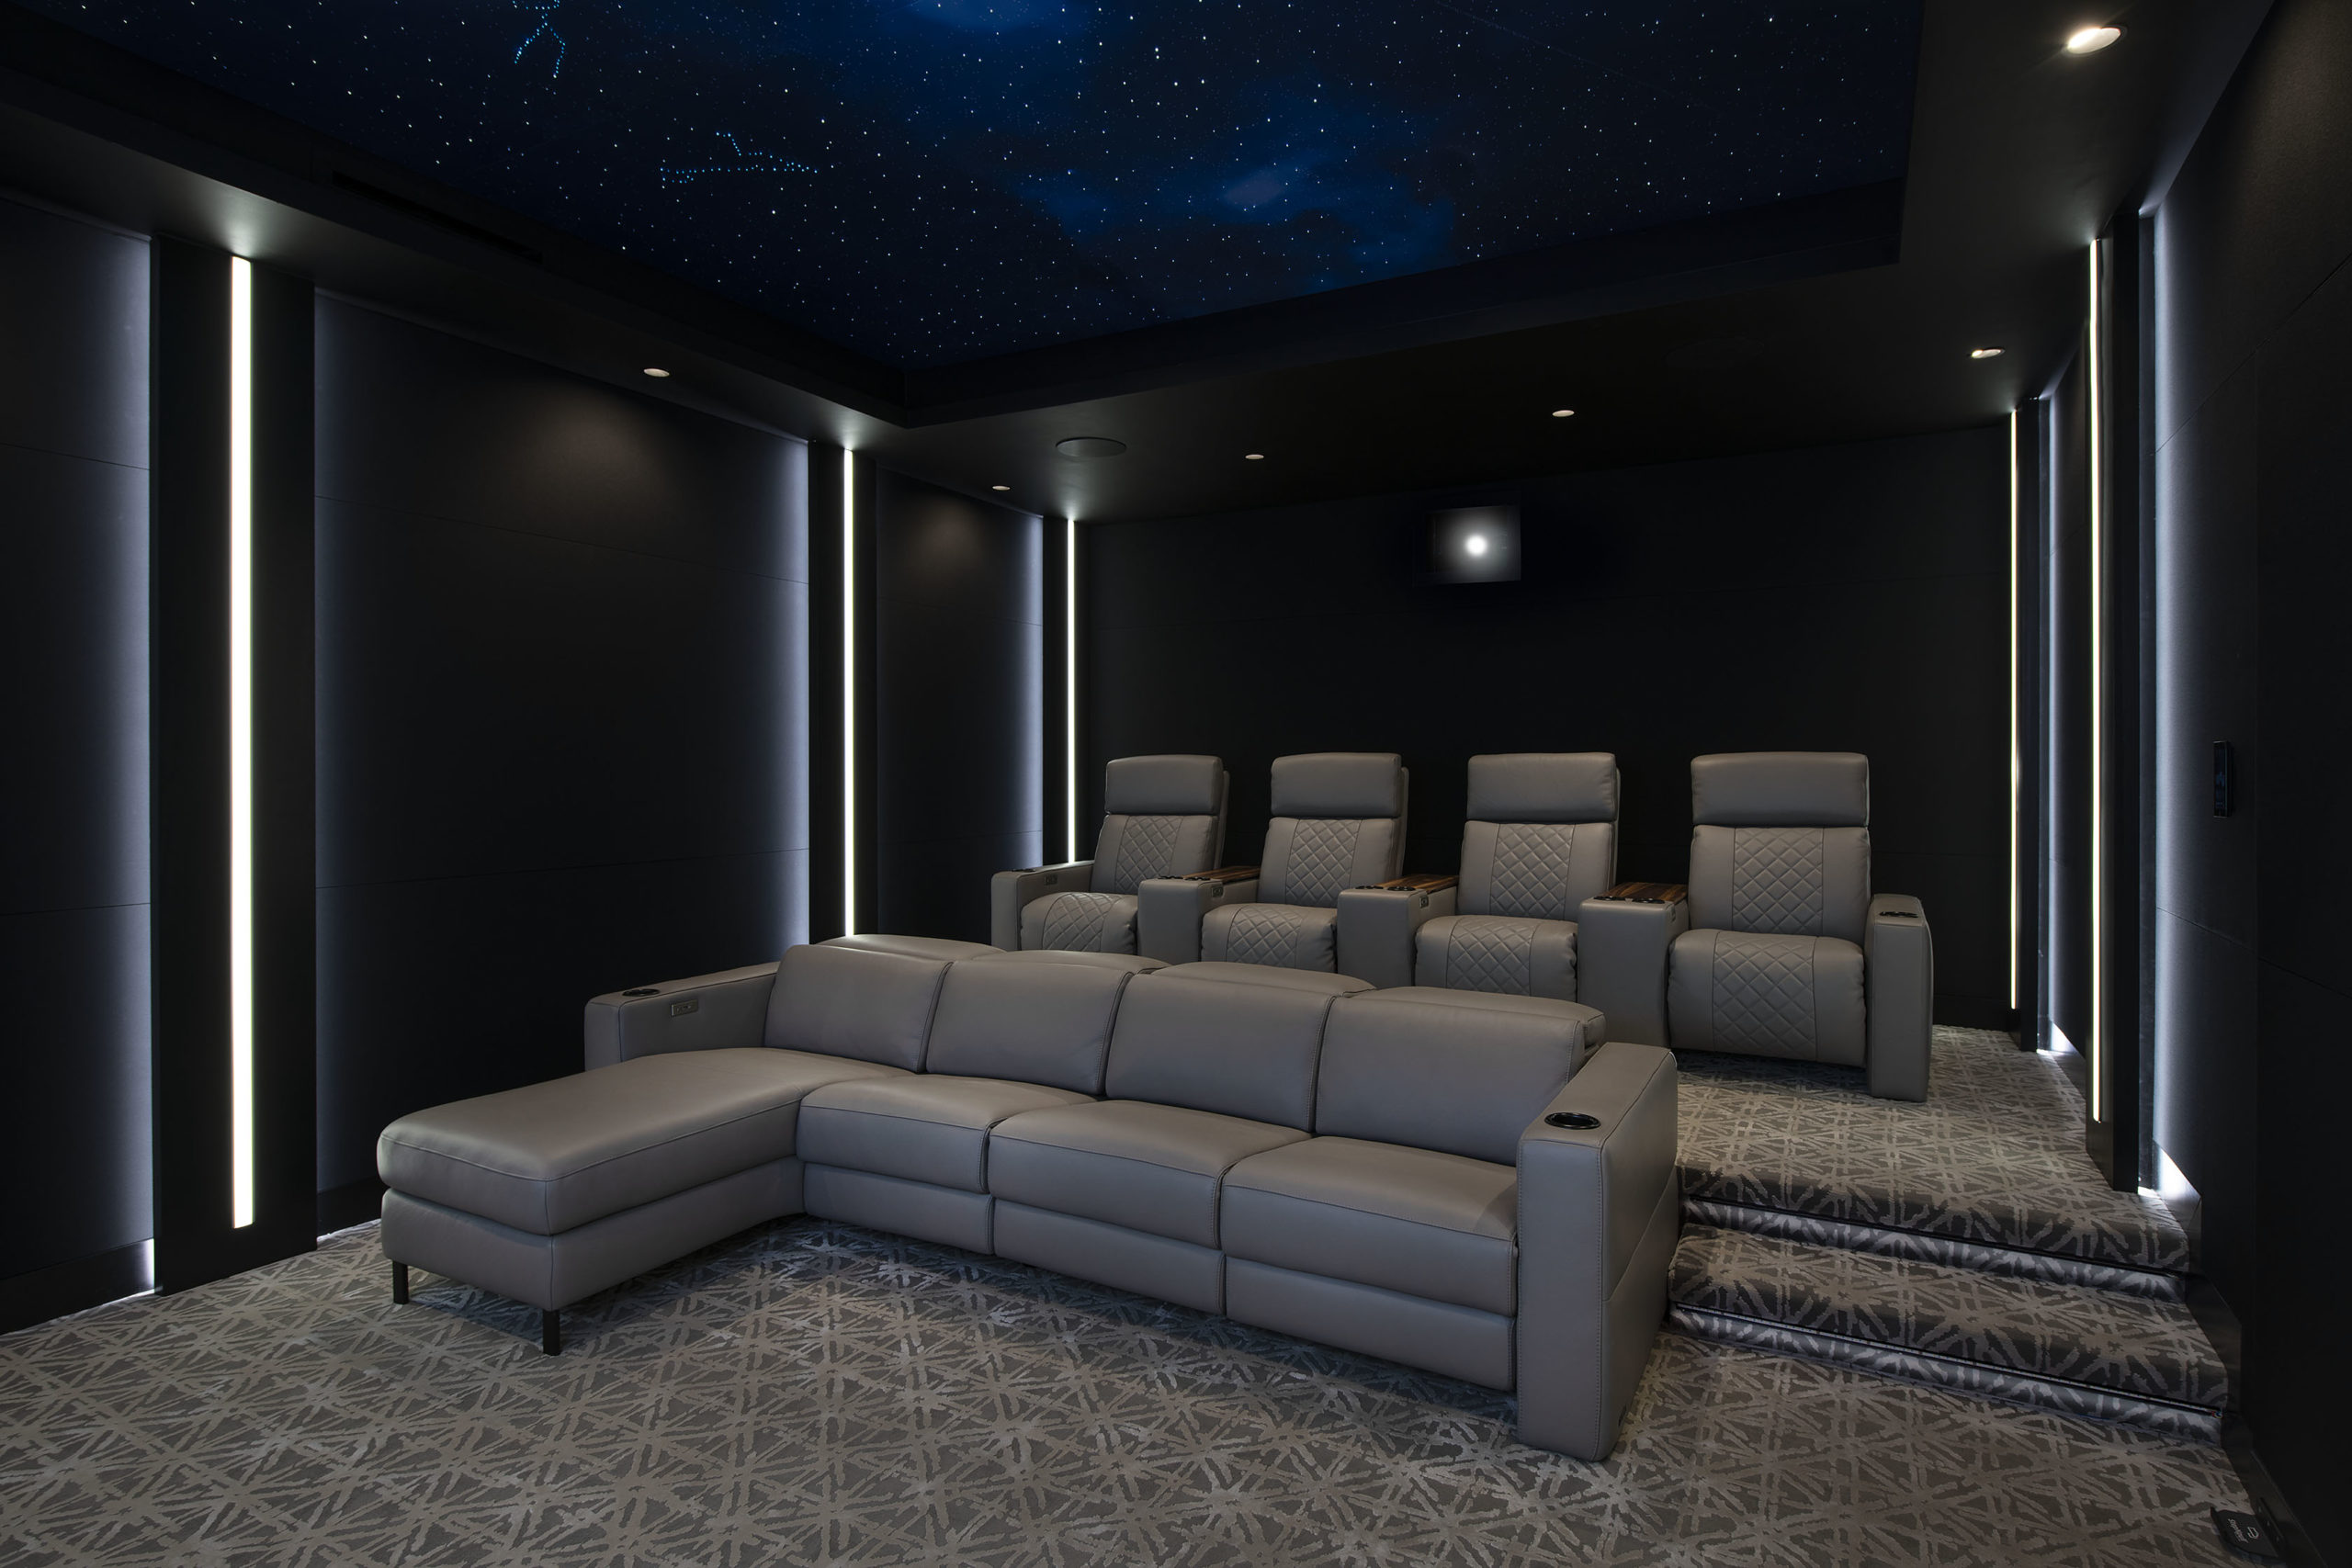 cinematech new theater scaled